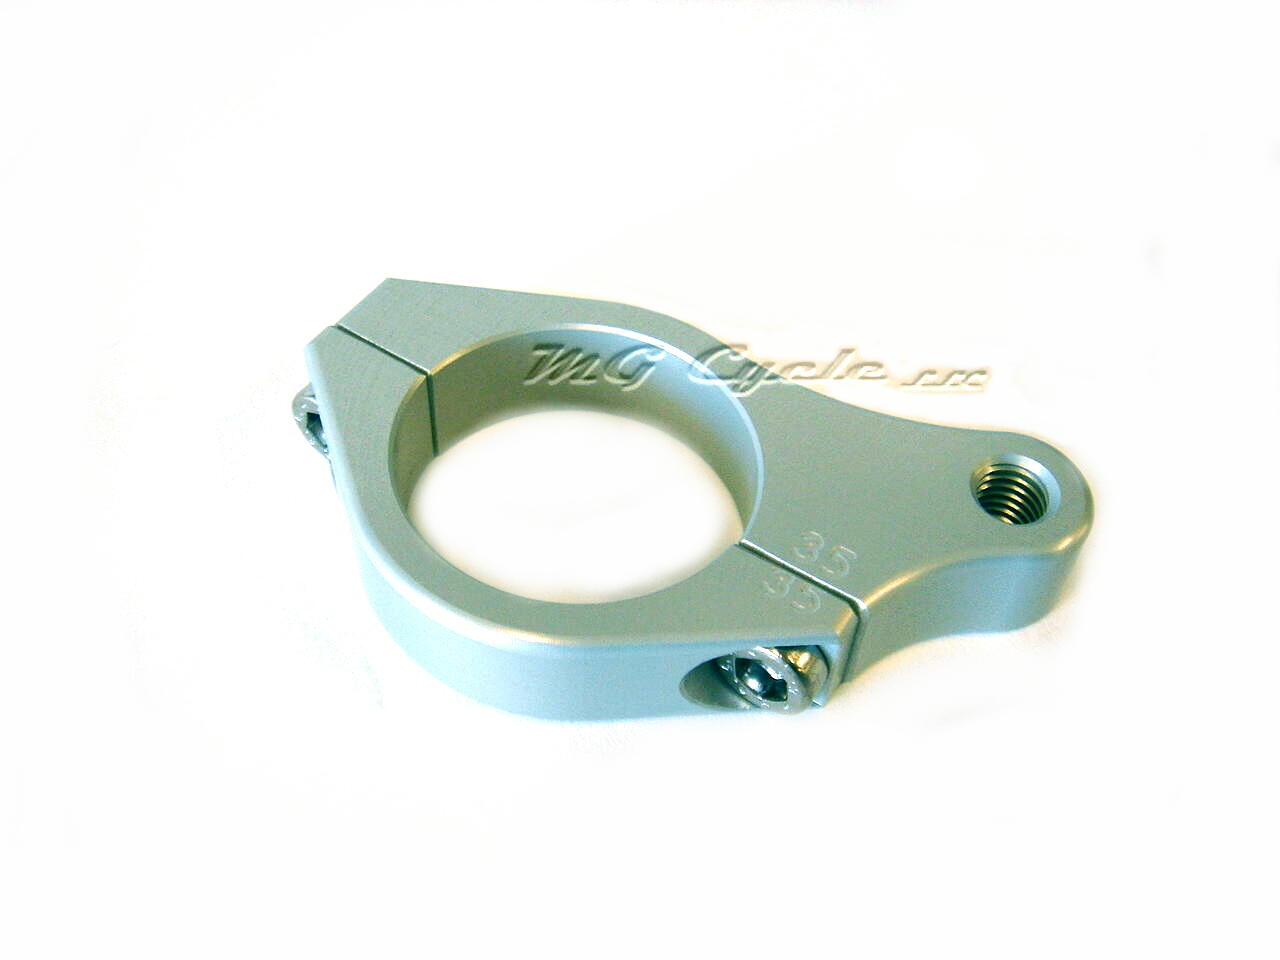 Steering damper attachment clamp for 35mm fork - Click Image to Close